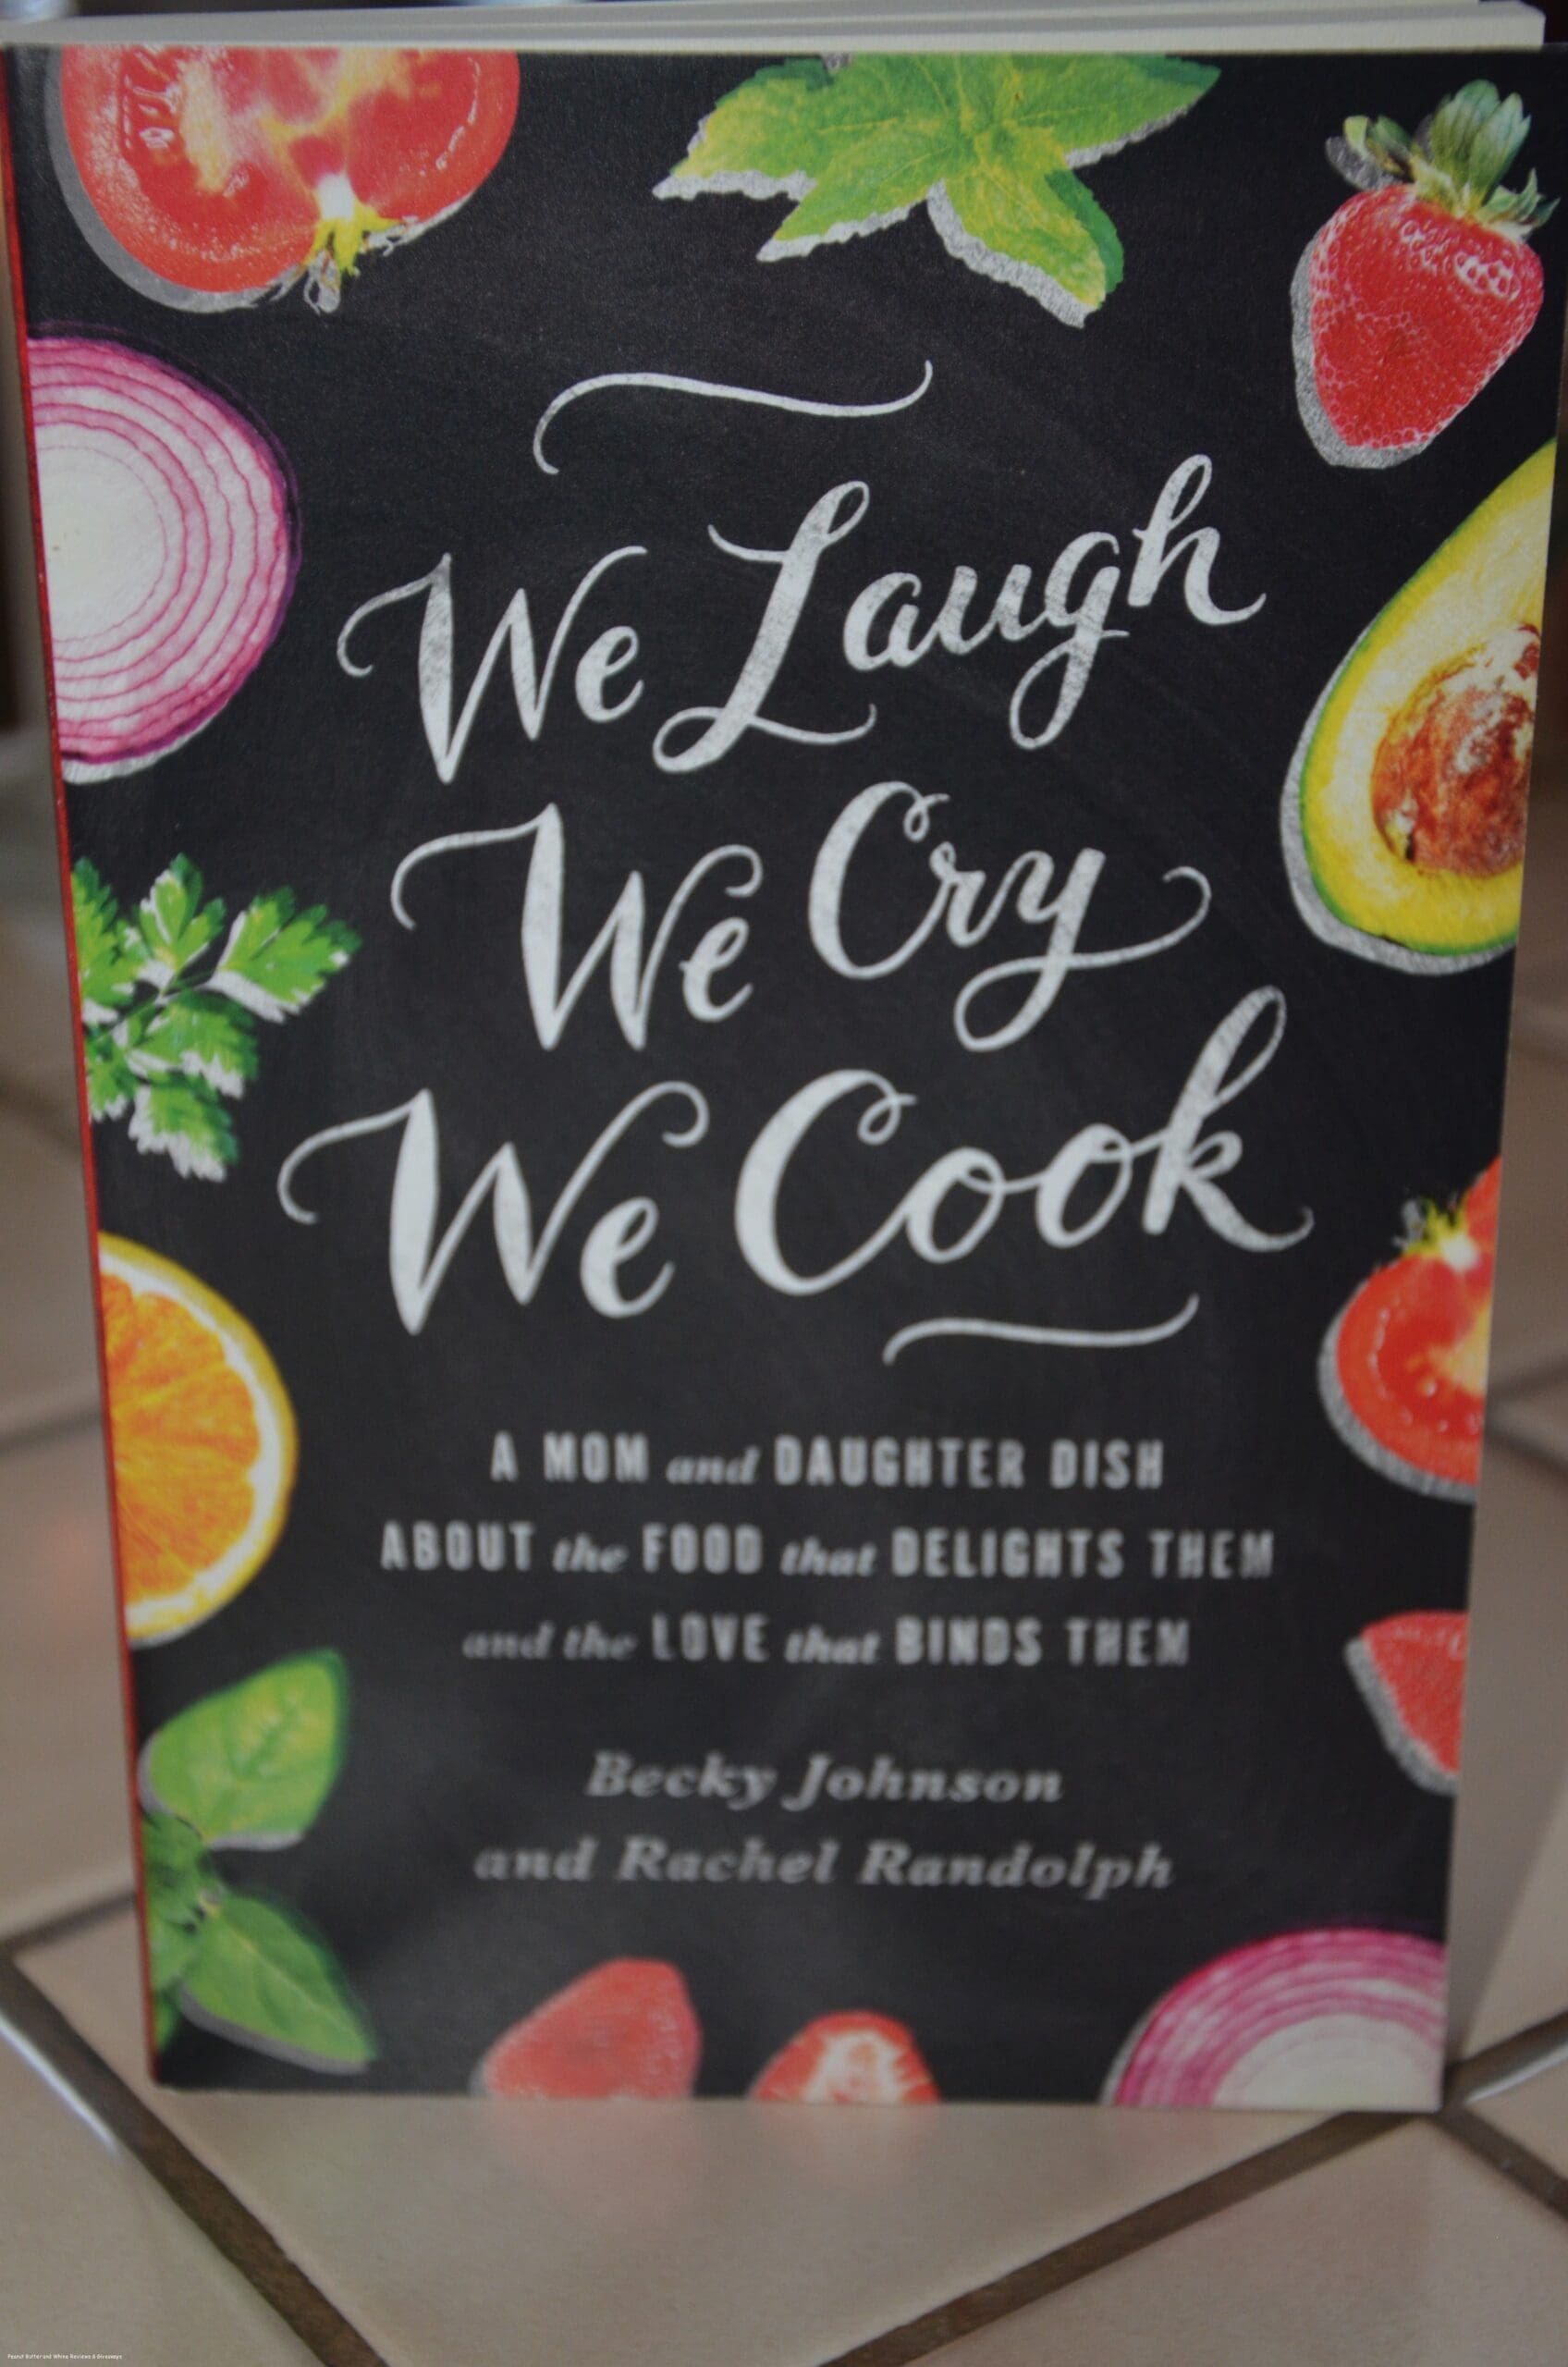 We laugh we cry we cook book cover